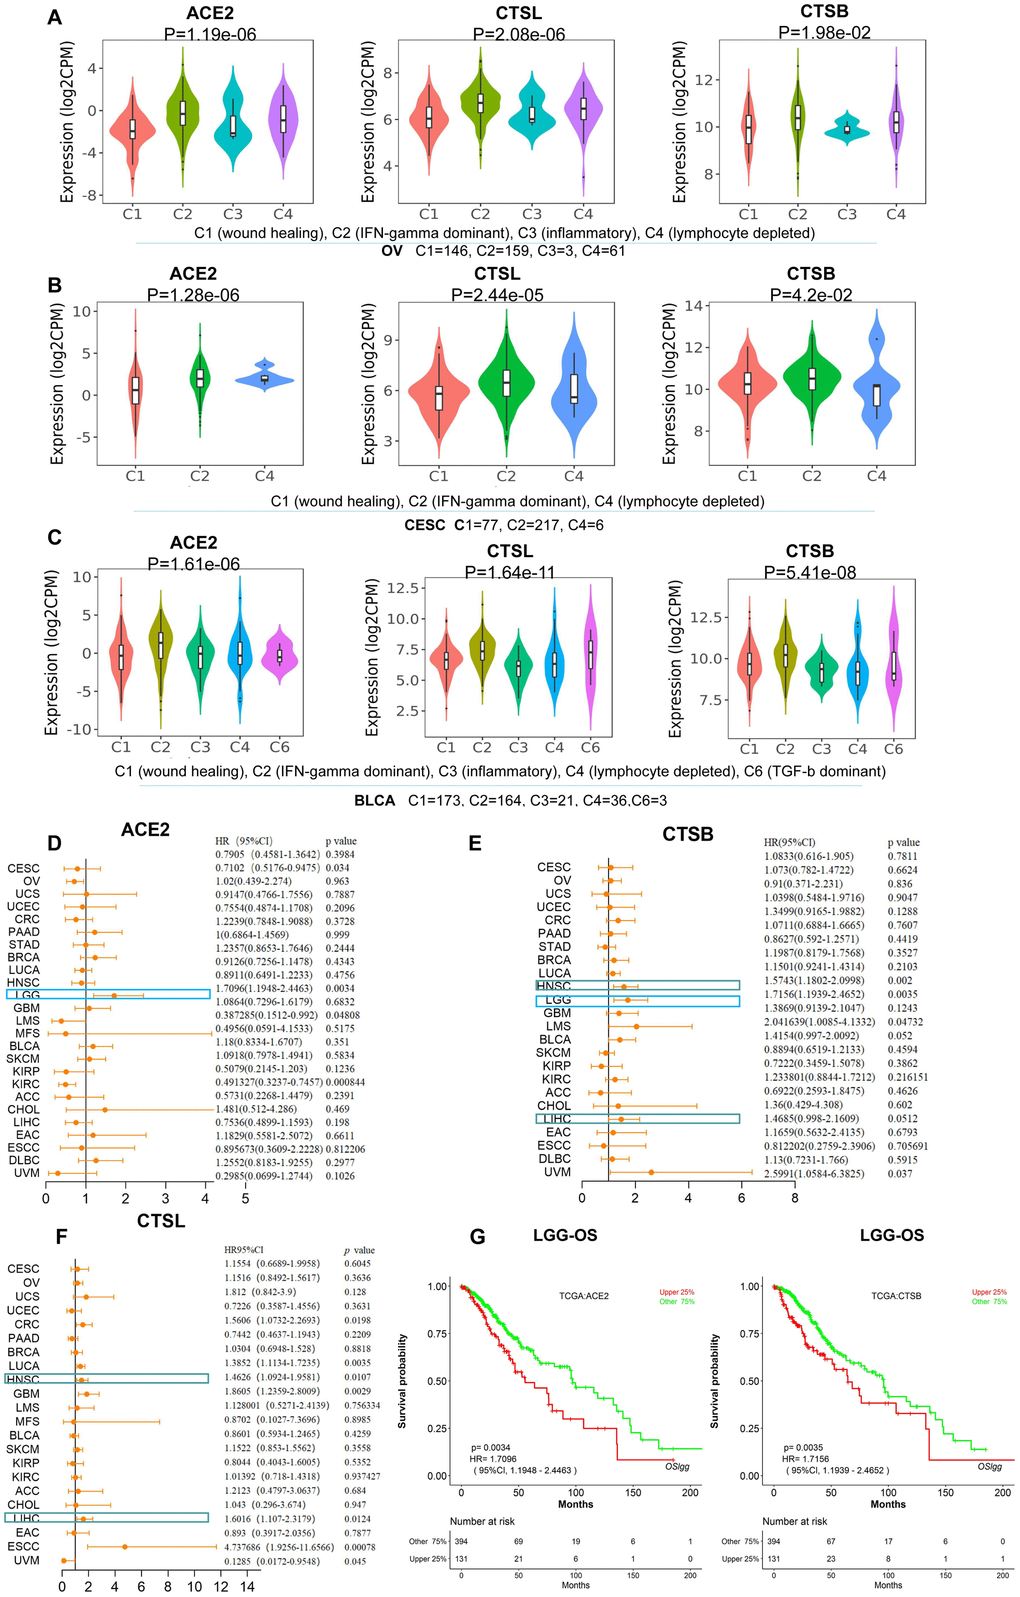 The identification of immune subtypes and prognosis for CTSL/B and ACE2 in pan-cancer. (A–C) The distribution graphs of ACE2 and CTSL/B in six immune subtypes in OV, CESC and BLCA. ACE2 and CTSL/B in OV, CESC and BLCA were most highly expressed in the C2 named IFN-gamma dominant subtype. (D–F) Forest maps analysis of overall survival for ACE2 and CTSL/B in pan-cancer (LOGpc). The blue boxes represent the overlap of tumors in which ACE2 and CTSB can predict adverse prognosis; the green boxes represent the overlap of tumors in which CTSB and CTSL can predict adverse prognosis. (G) The overall survival analyses of ACE2 and CTSB in LGG utilizing the LOGpc online tool based on TCGA data, with results showing that ACE2 and CTSB both predict poor prognosis. p1, p